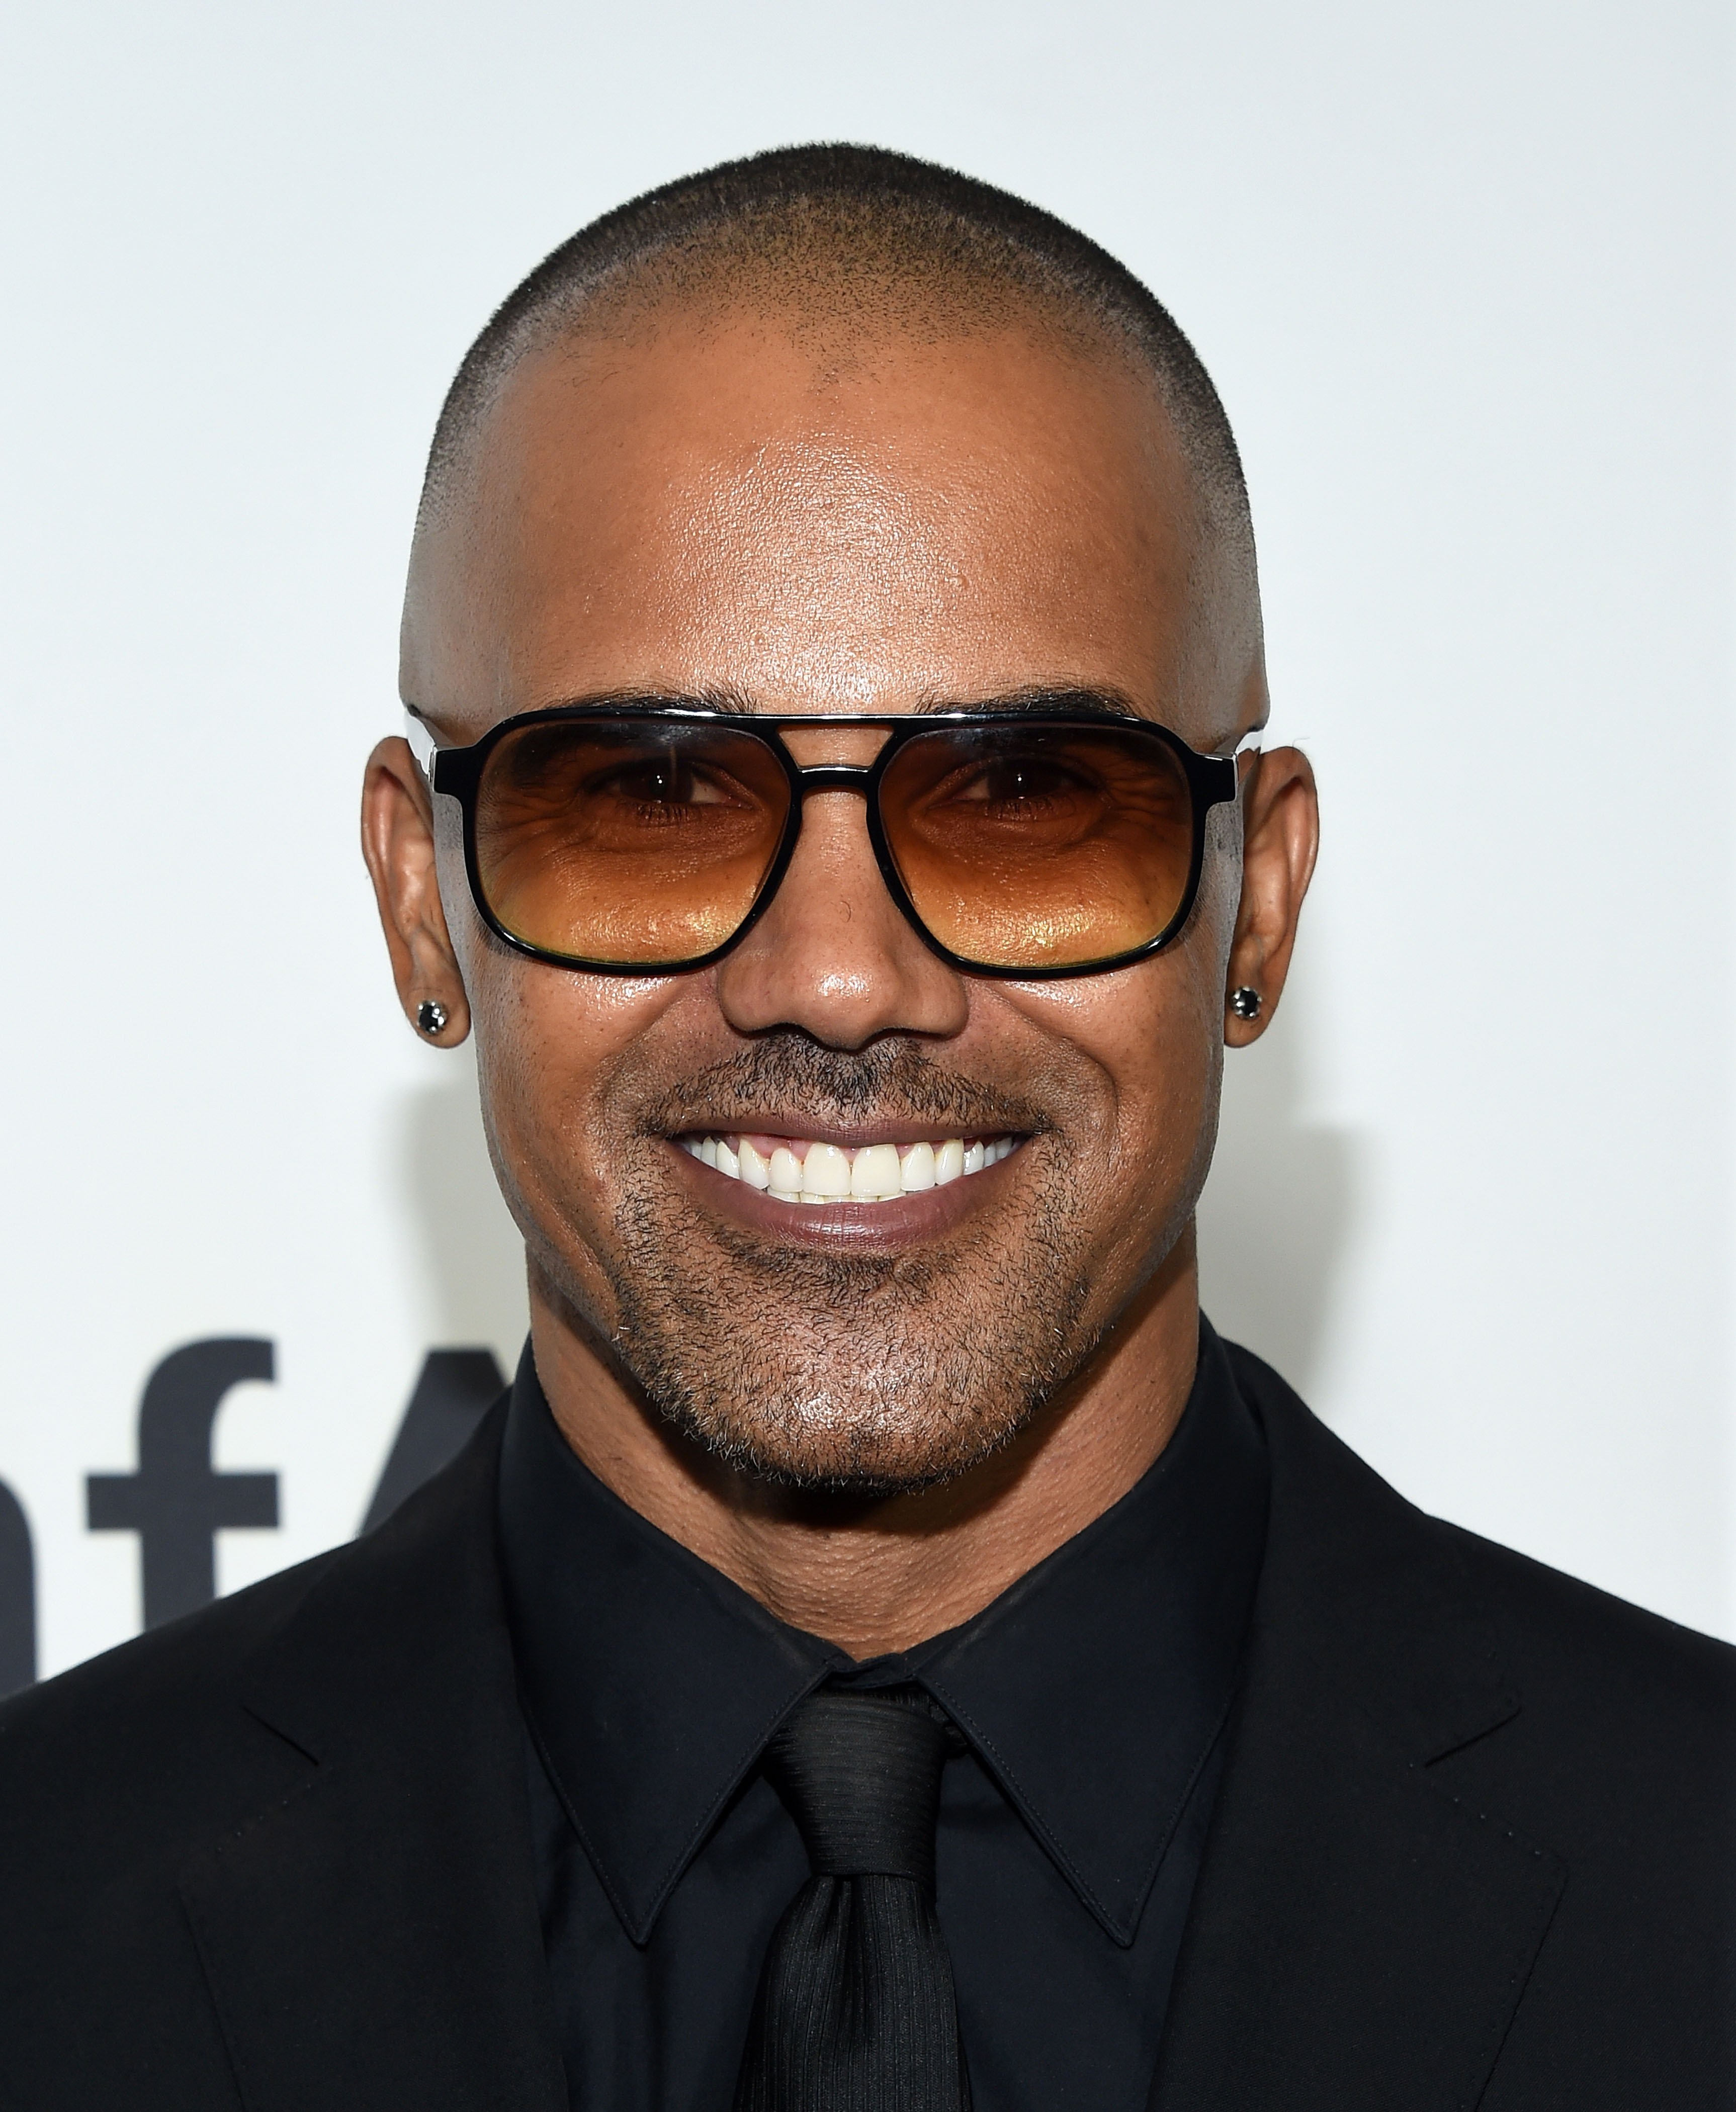 Shemar Moore pictured at the nds amfAR's Inspiration Gala in Los Angeles, California in 2016. | Source: Shutterstock